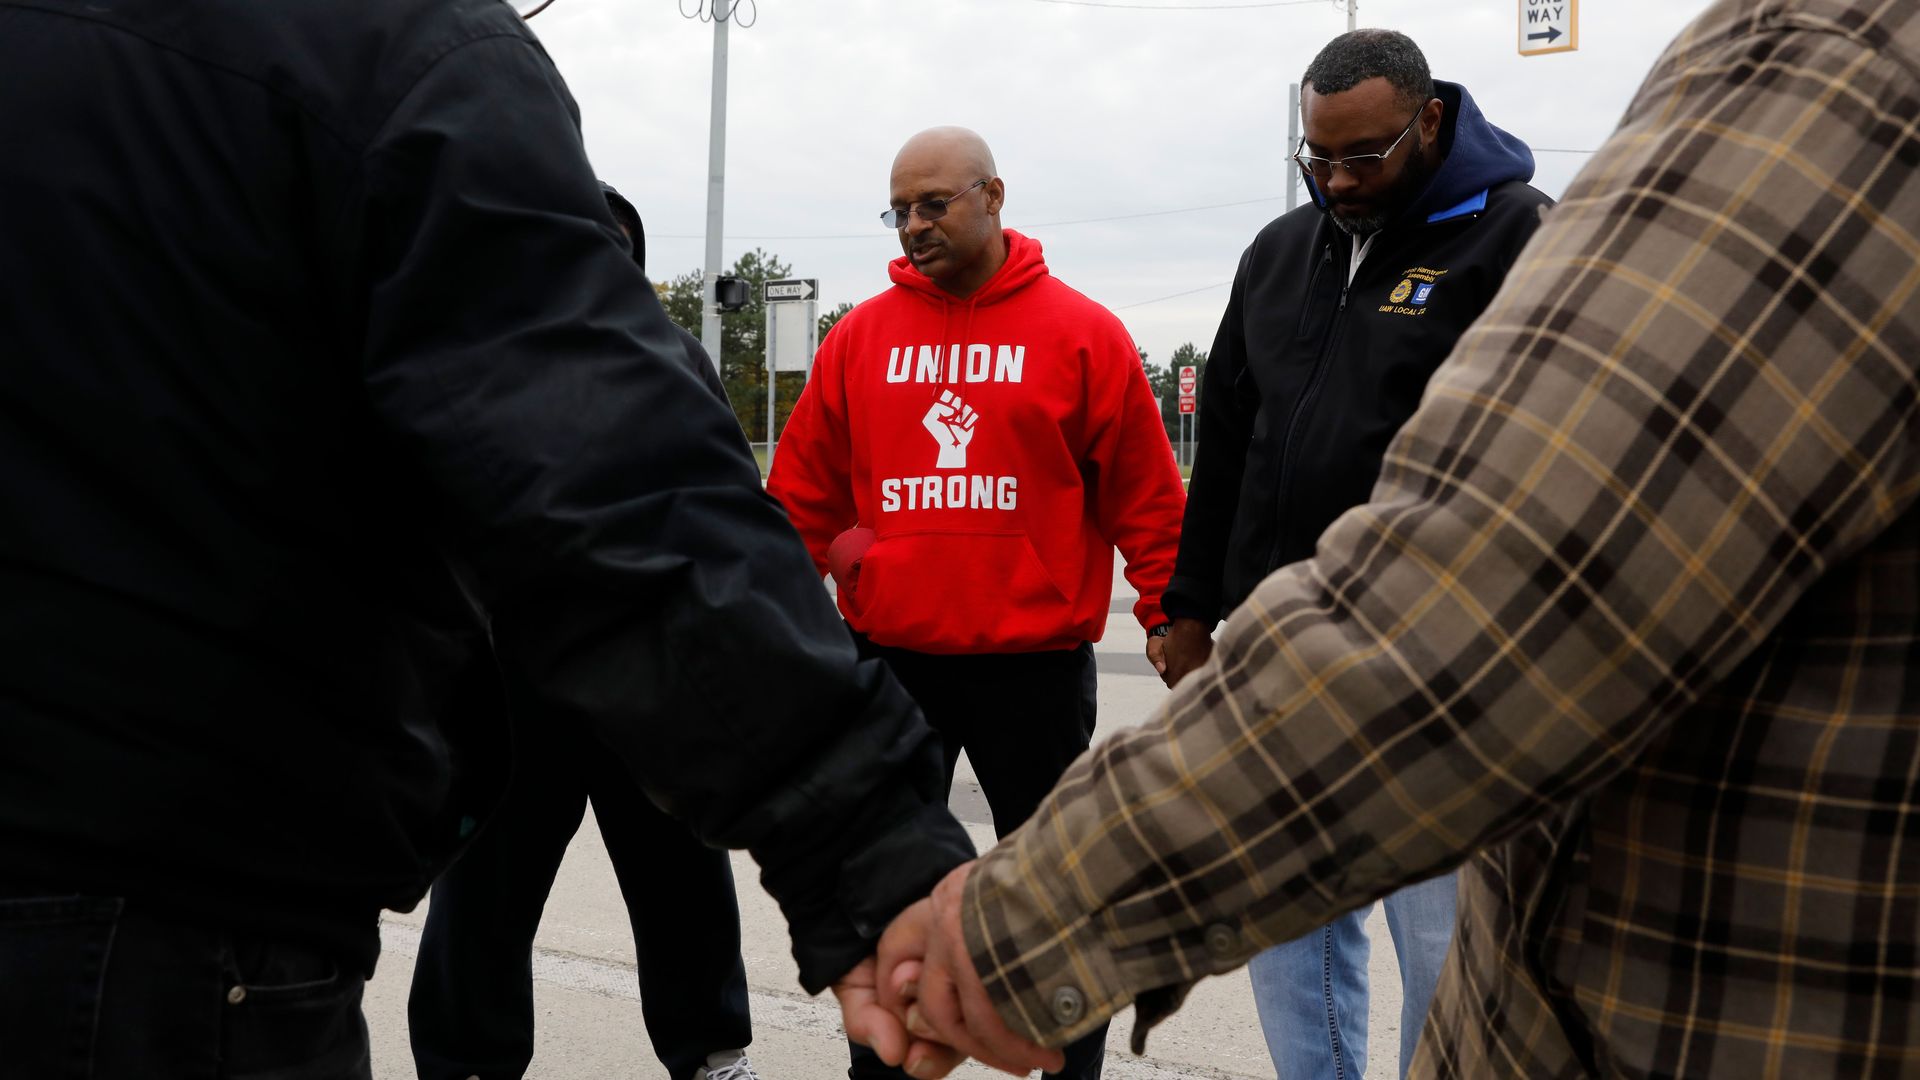 In this image, a man stands in a circle with "union strong" on his sweatshirt. 